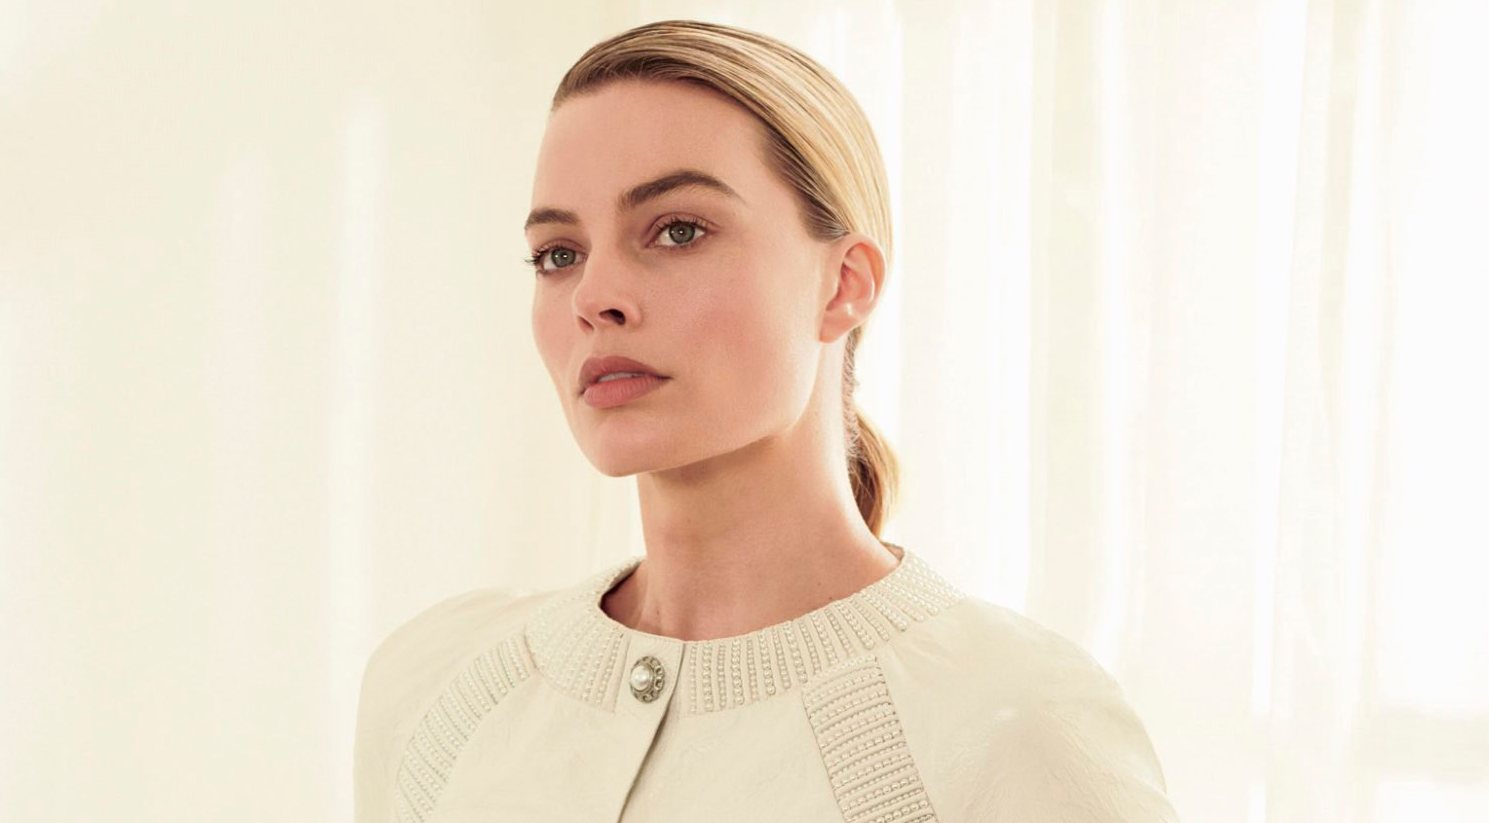 Margot Robbie: 'I share Gabrielle Chanel's ideas about breaking